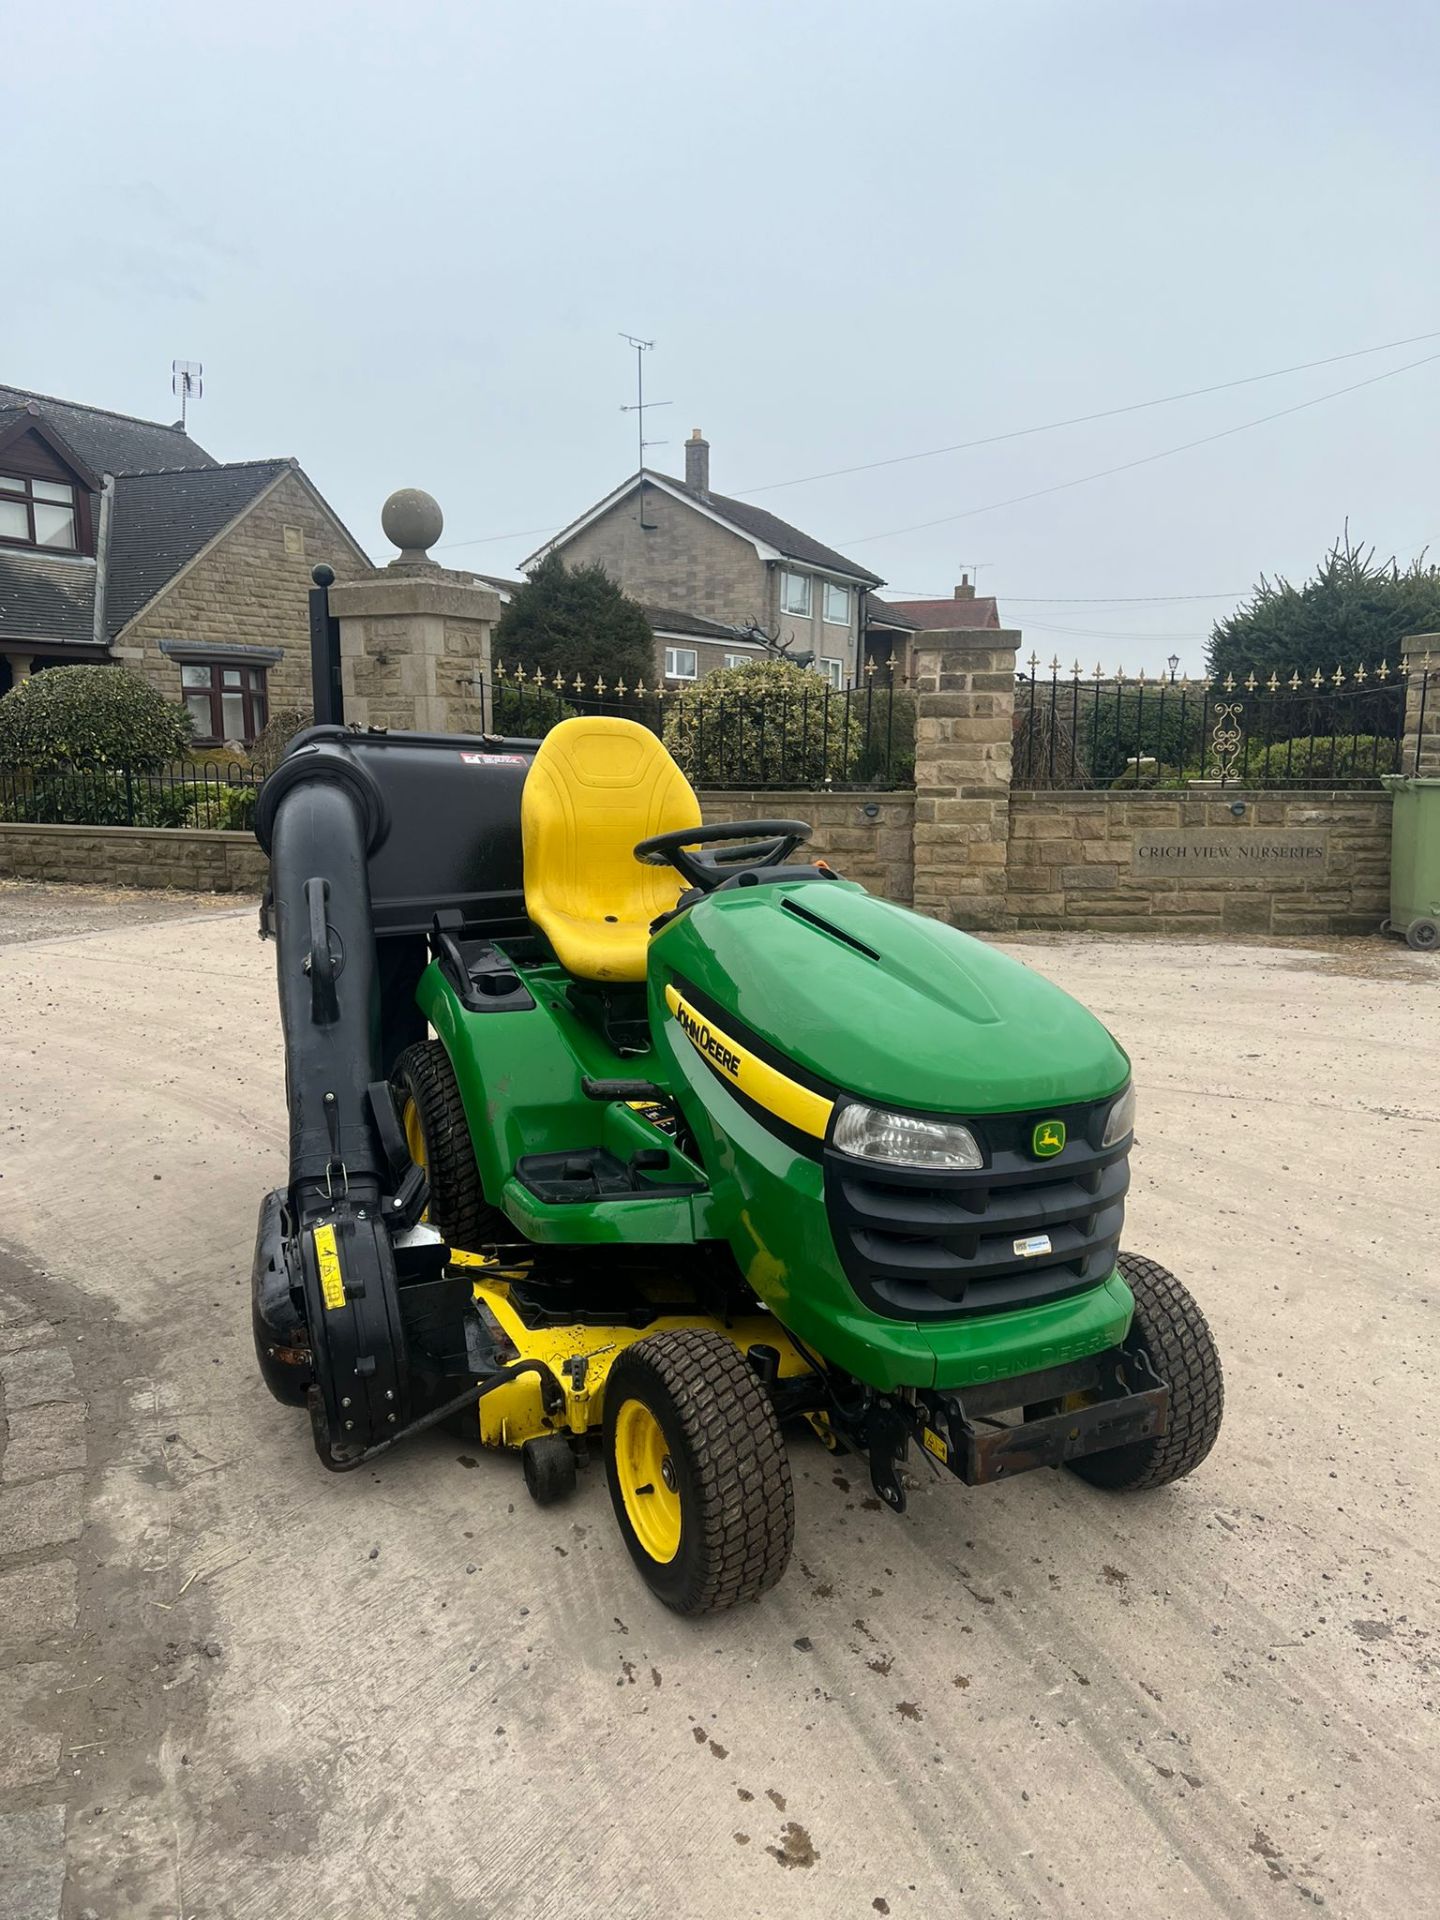 JOHN DEERE X540 RIDE ON LAWN MOWER, HYDRAULIC UP AND DOWN DECK, YEAR 2012 *PLUS VAT*